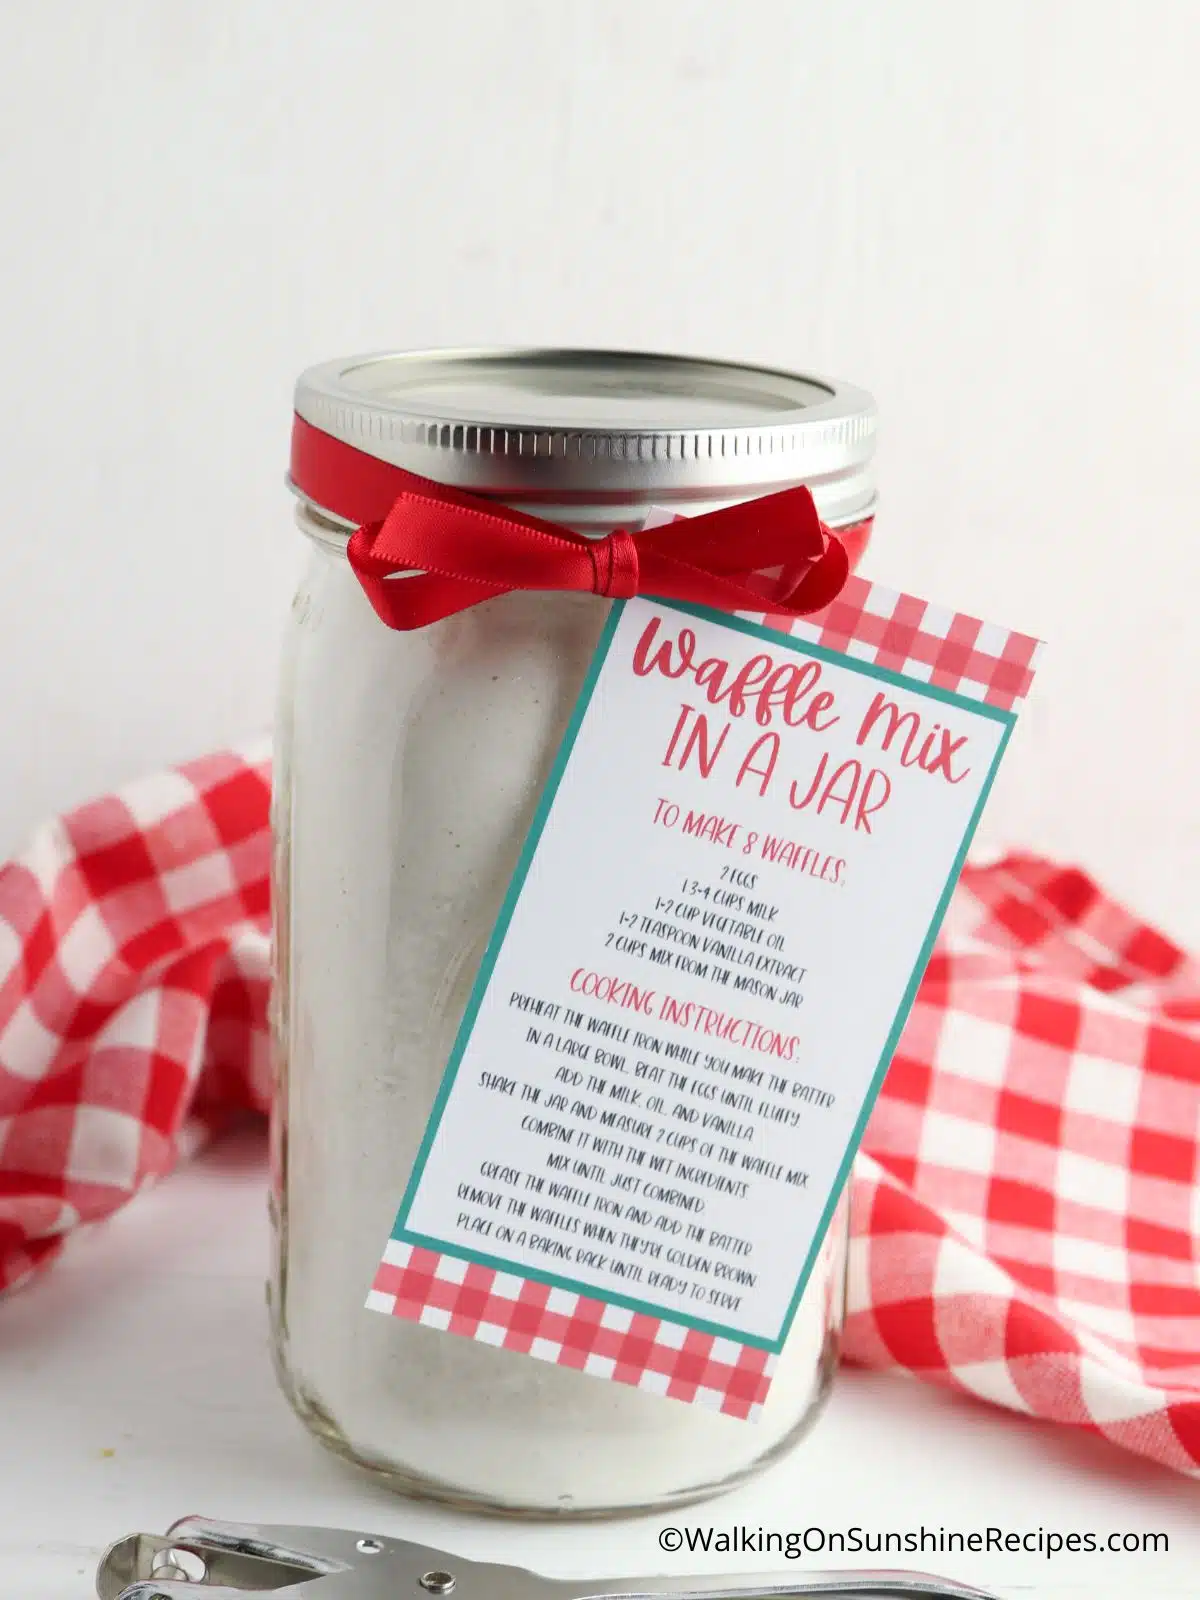 Waffle mix in a jar for gift.